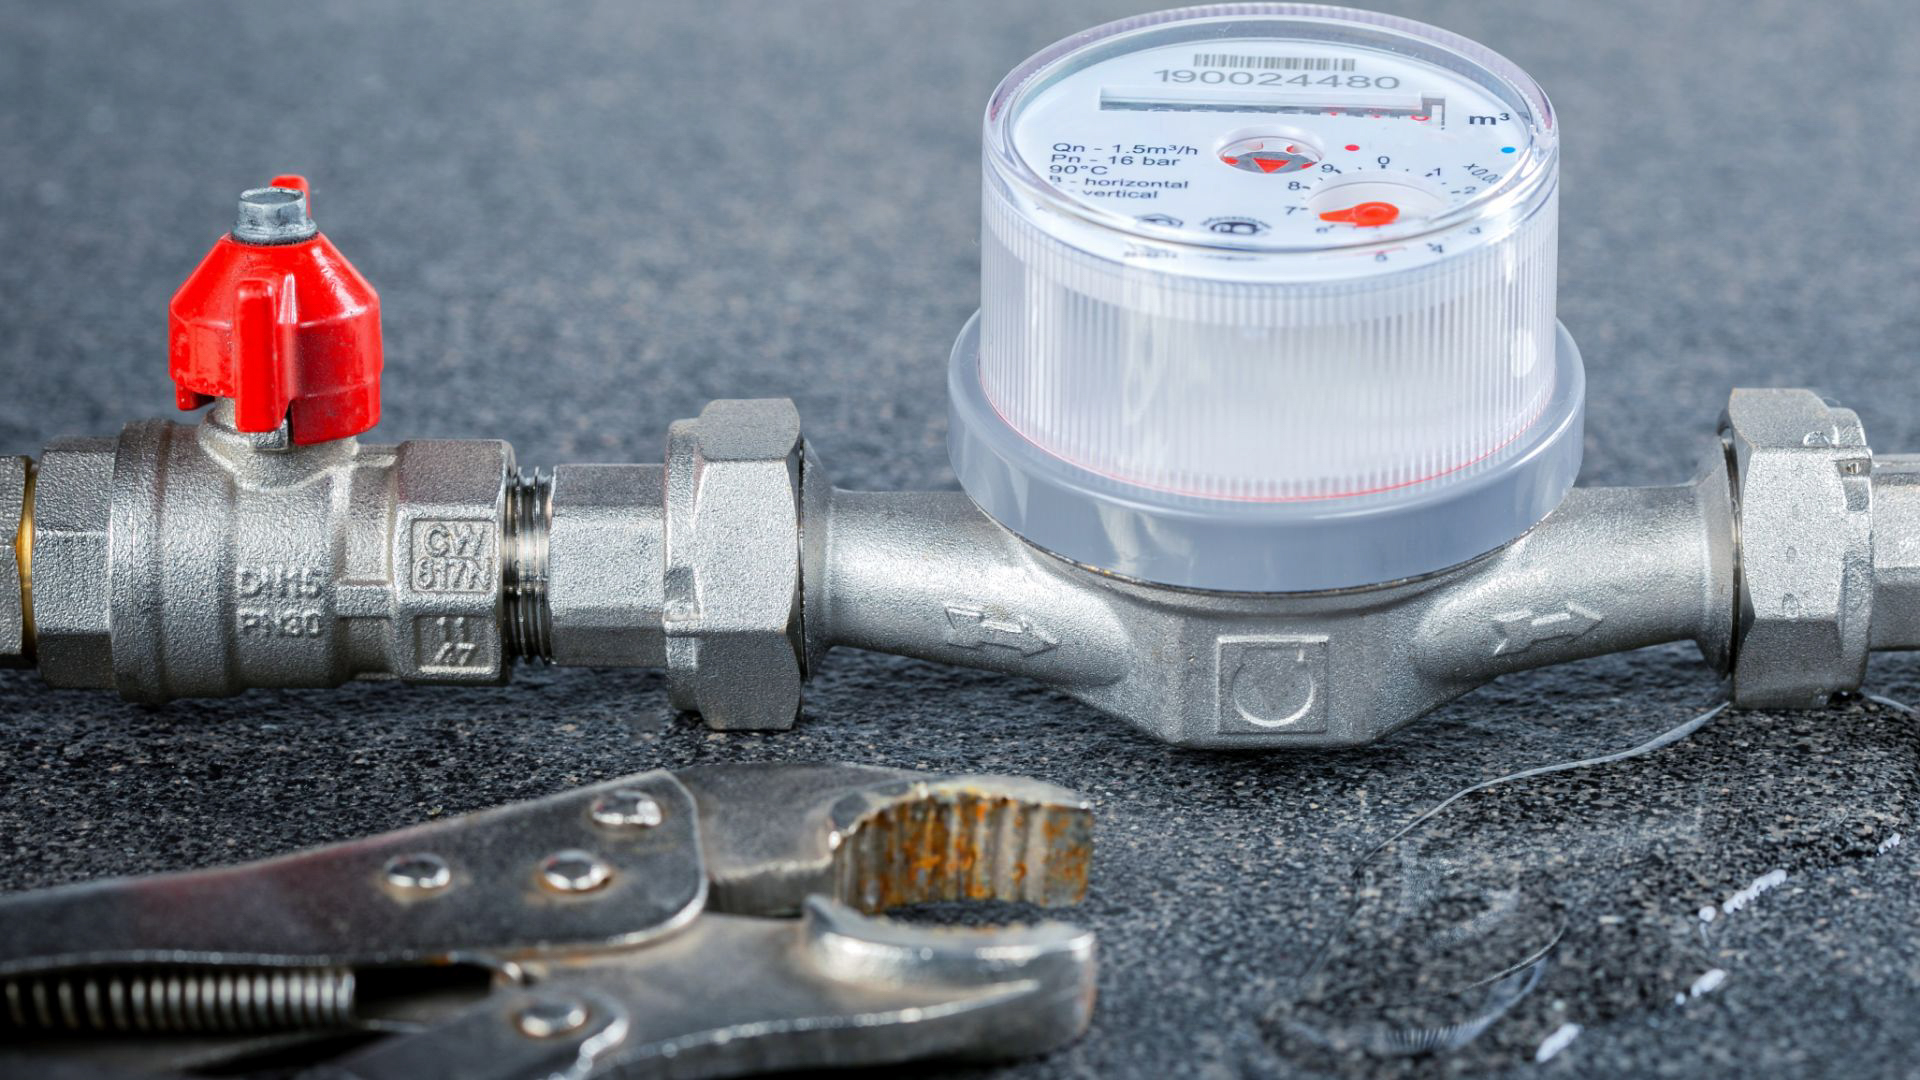 Water Leak Detection & Repair in Golden, CO from Fix-it 24/7 Plumbing, Heating, Air & Electric